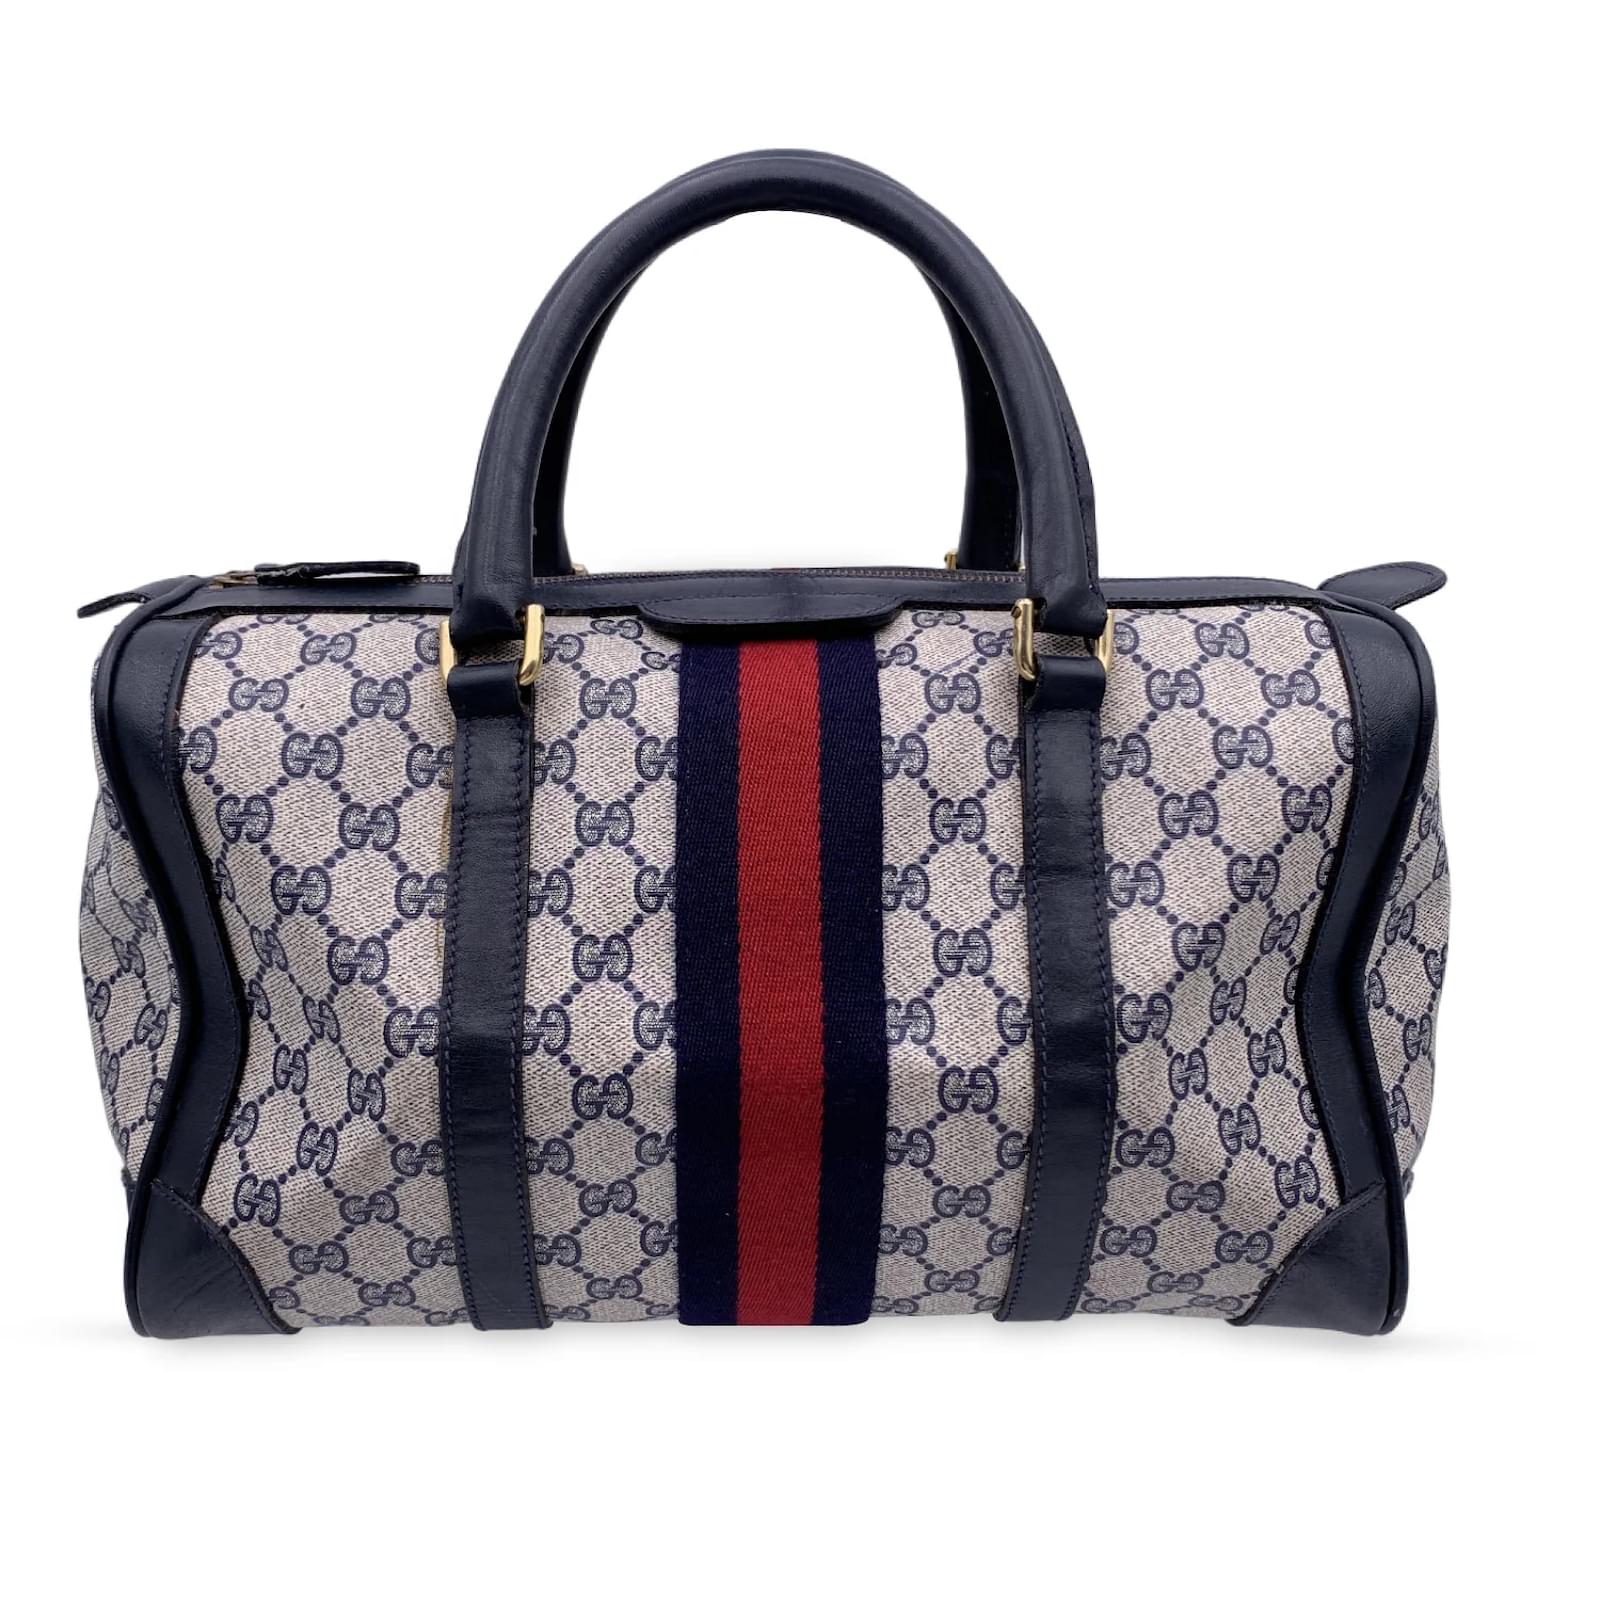 Gucci Navy GG Supreme Canvas & Leather Boston Bag in Blue